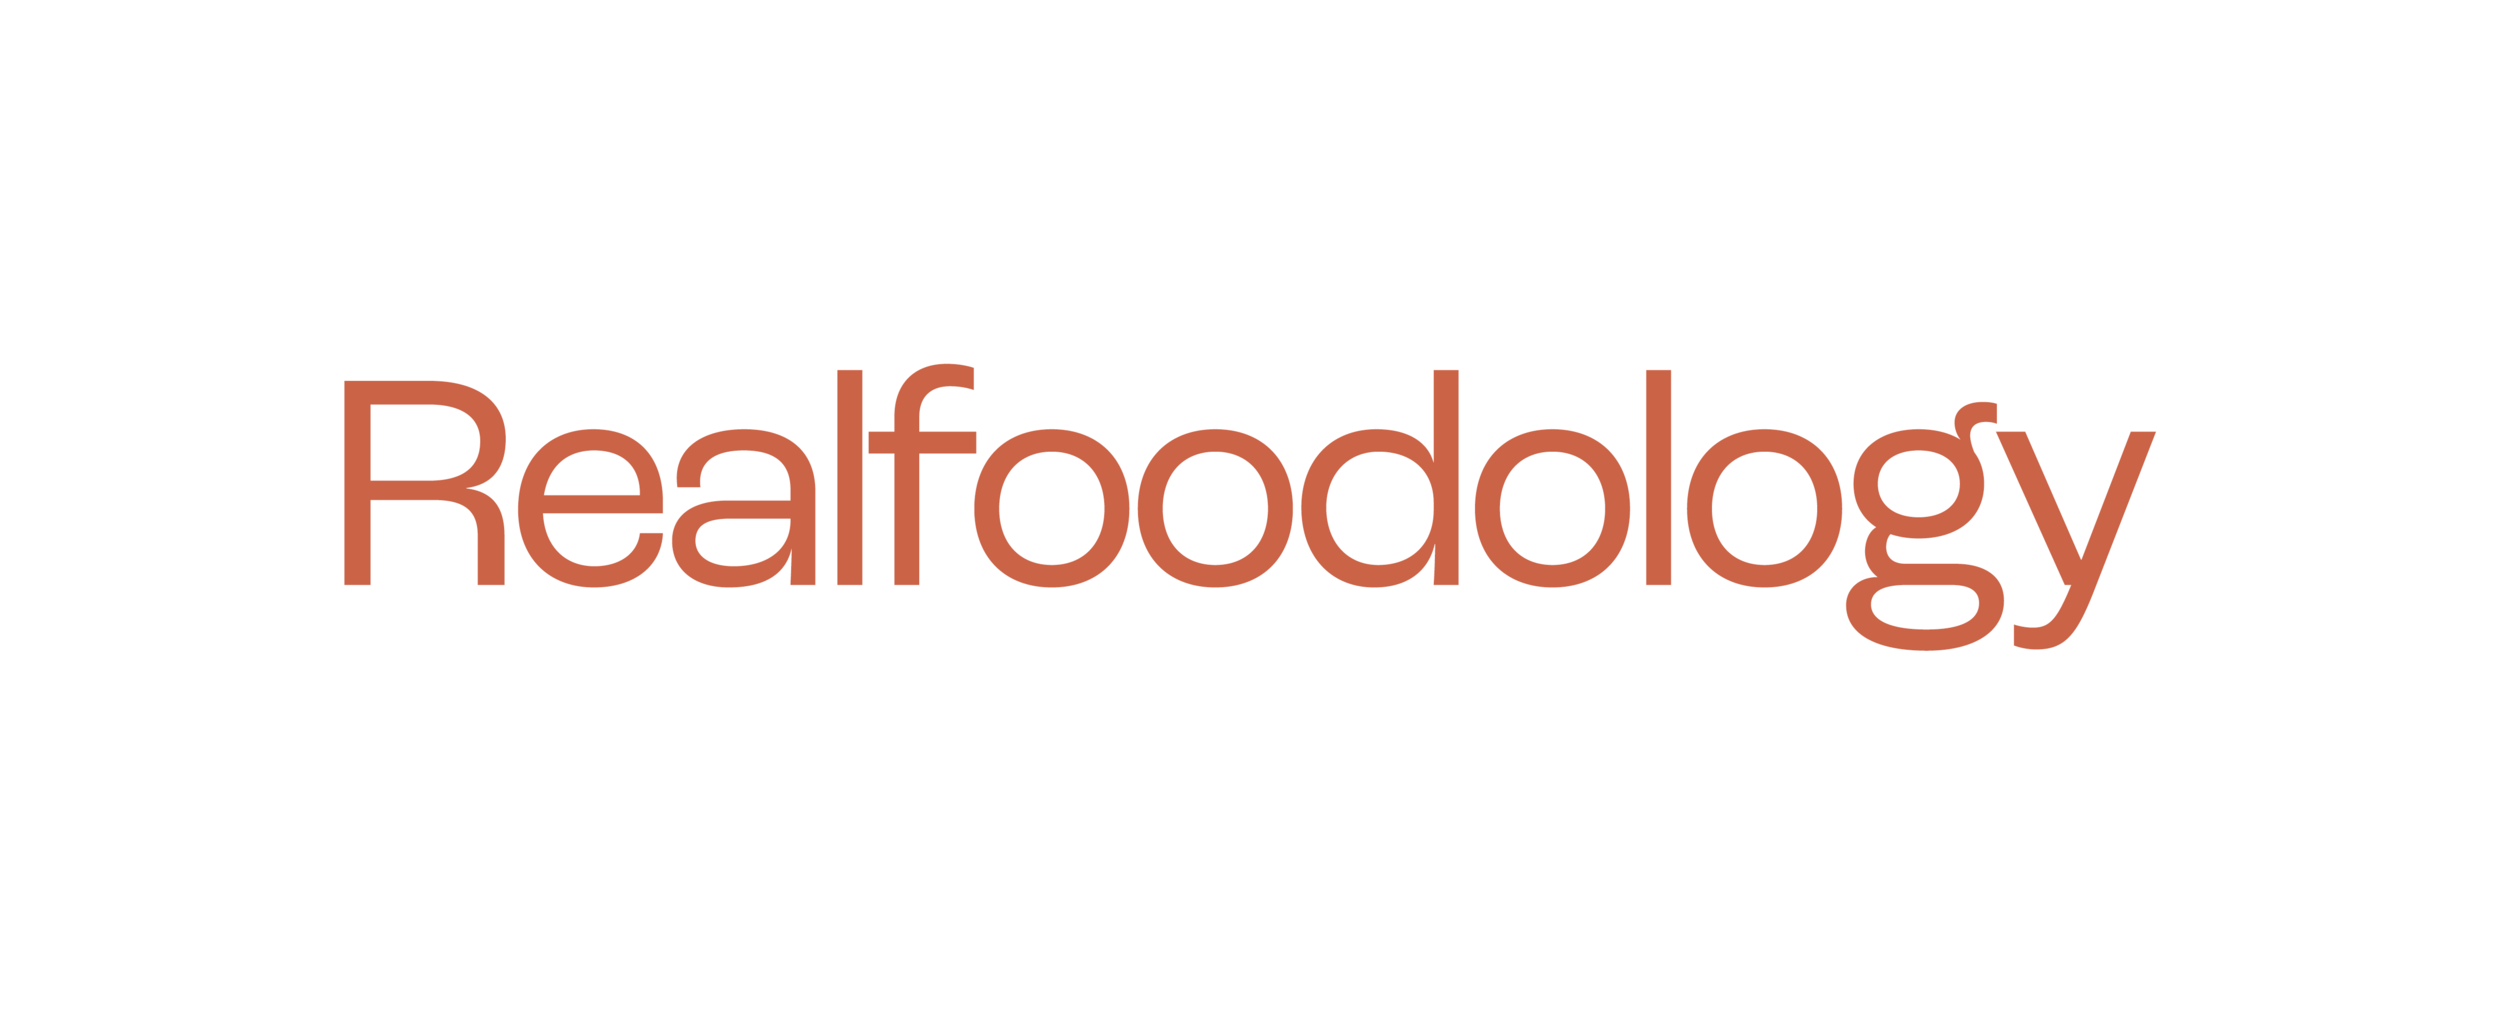 Realfoodology